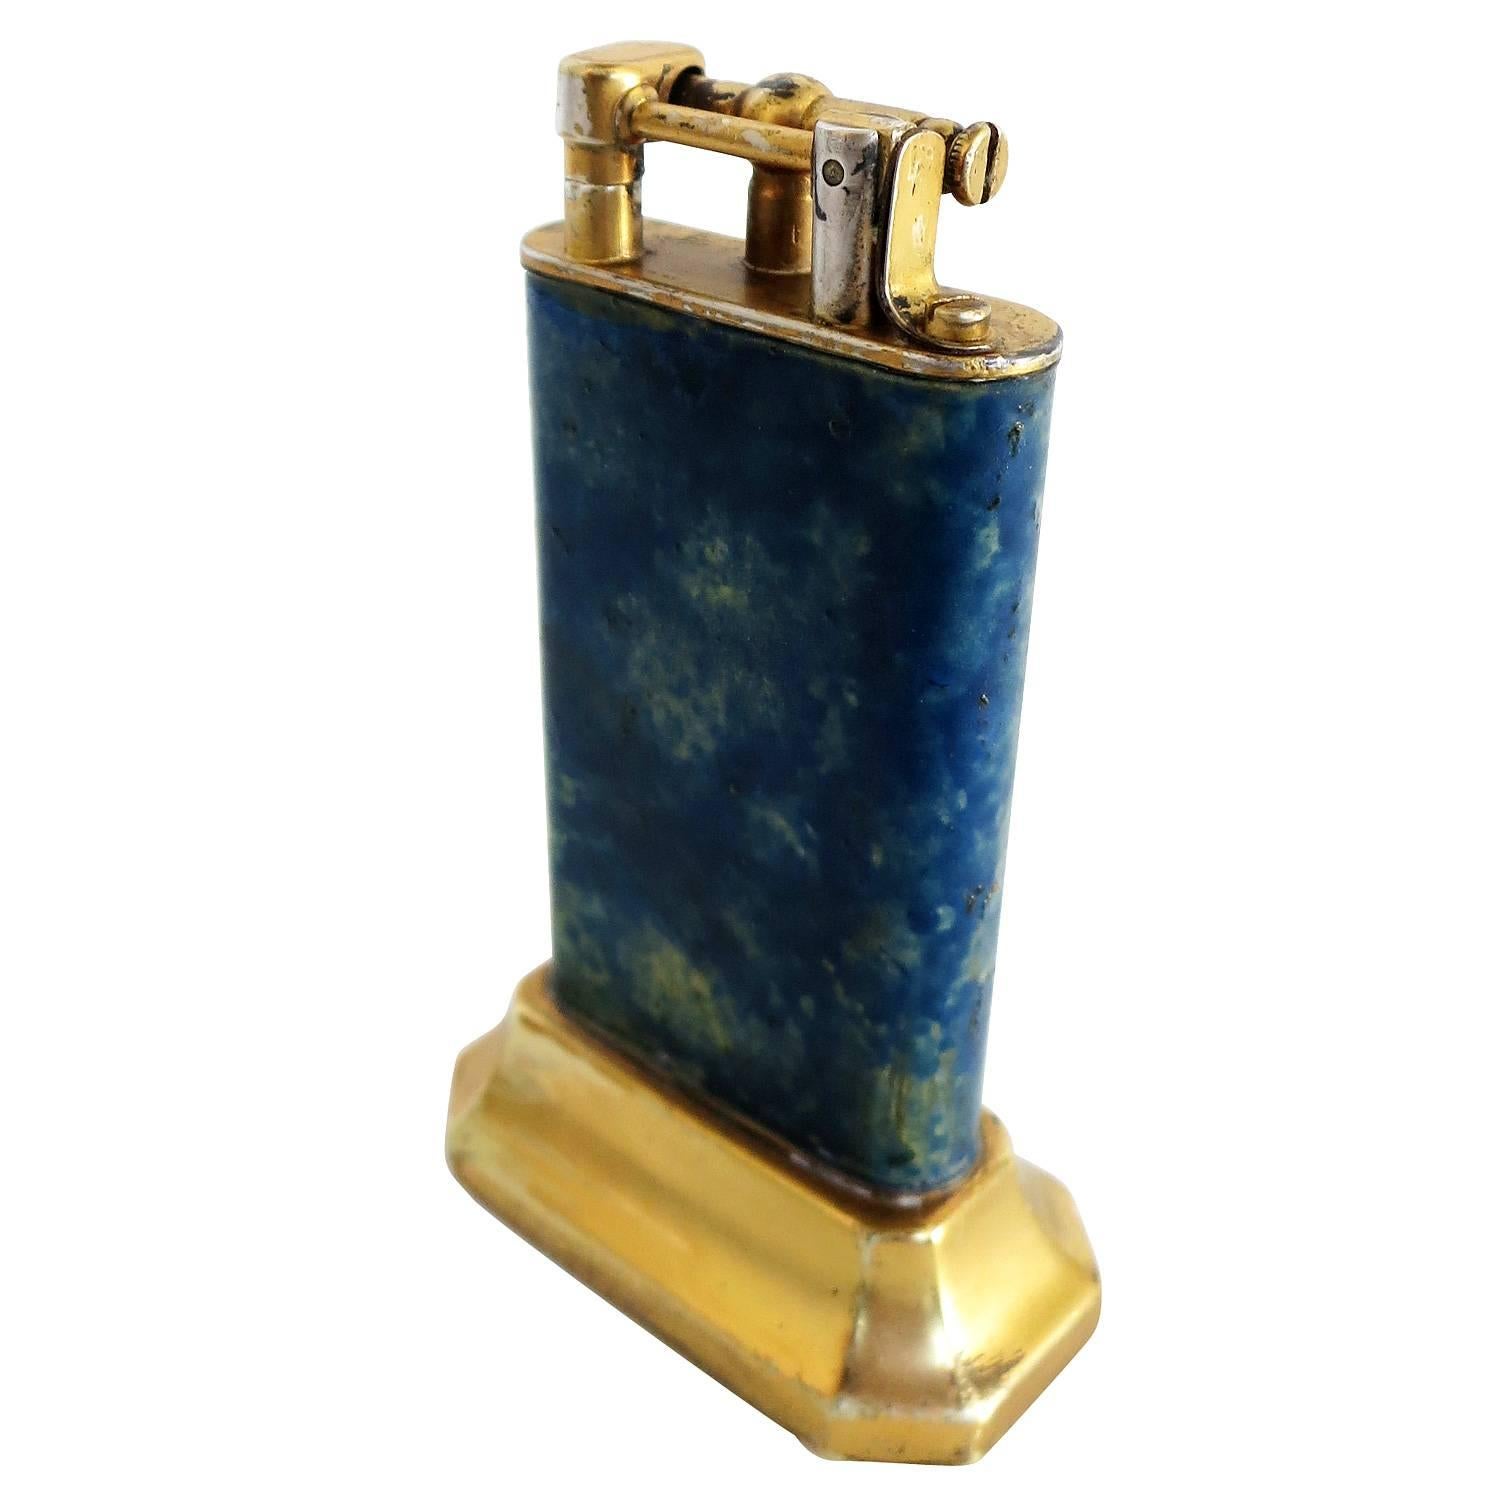 Brass lift arm table lighter with enamel surfac by Dunhill 